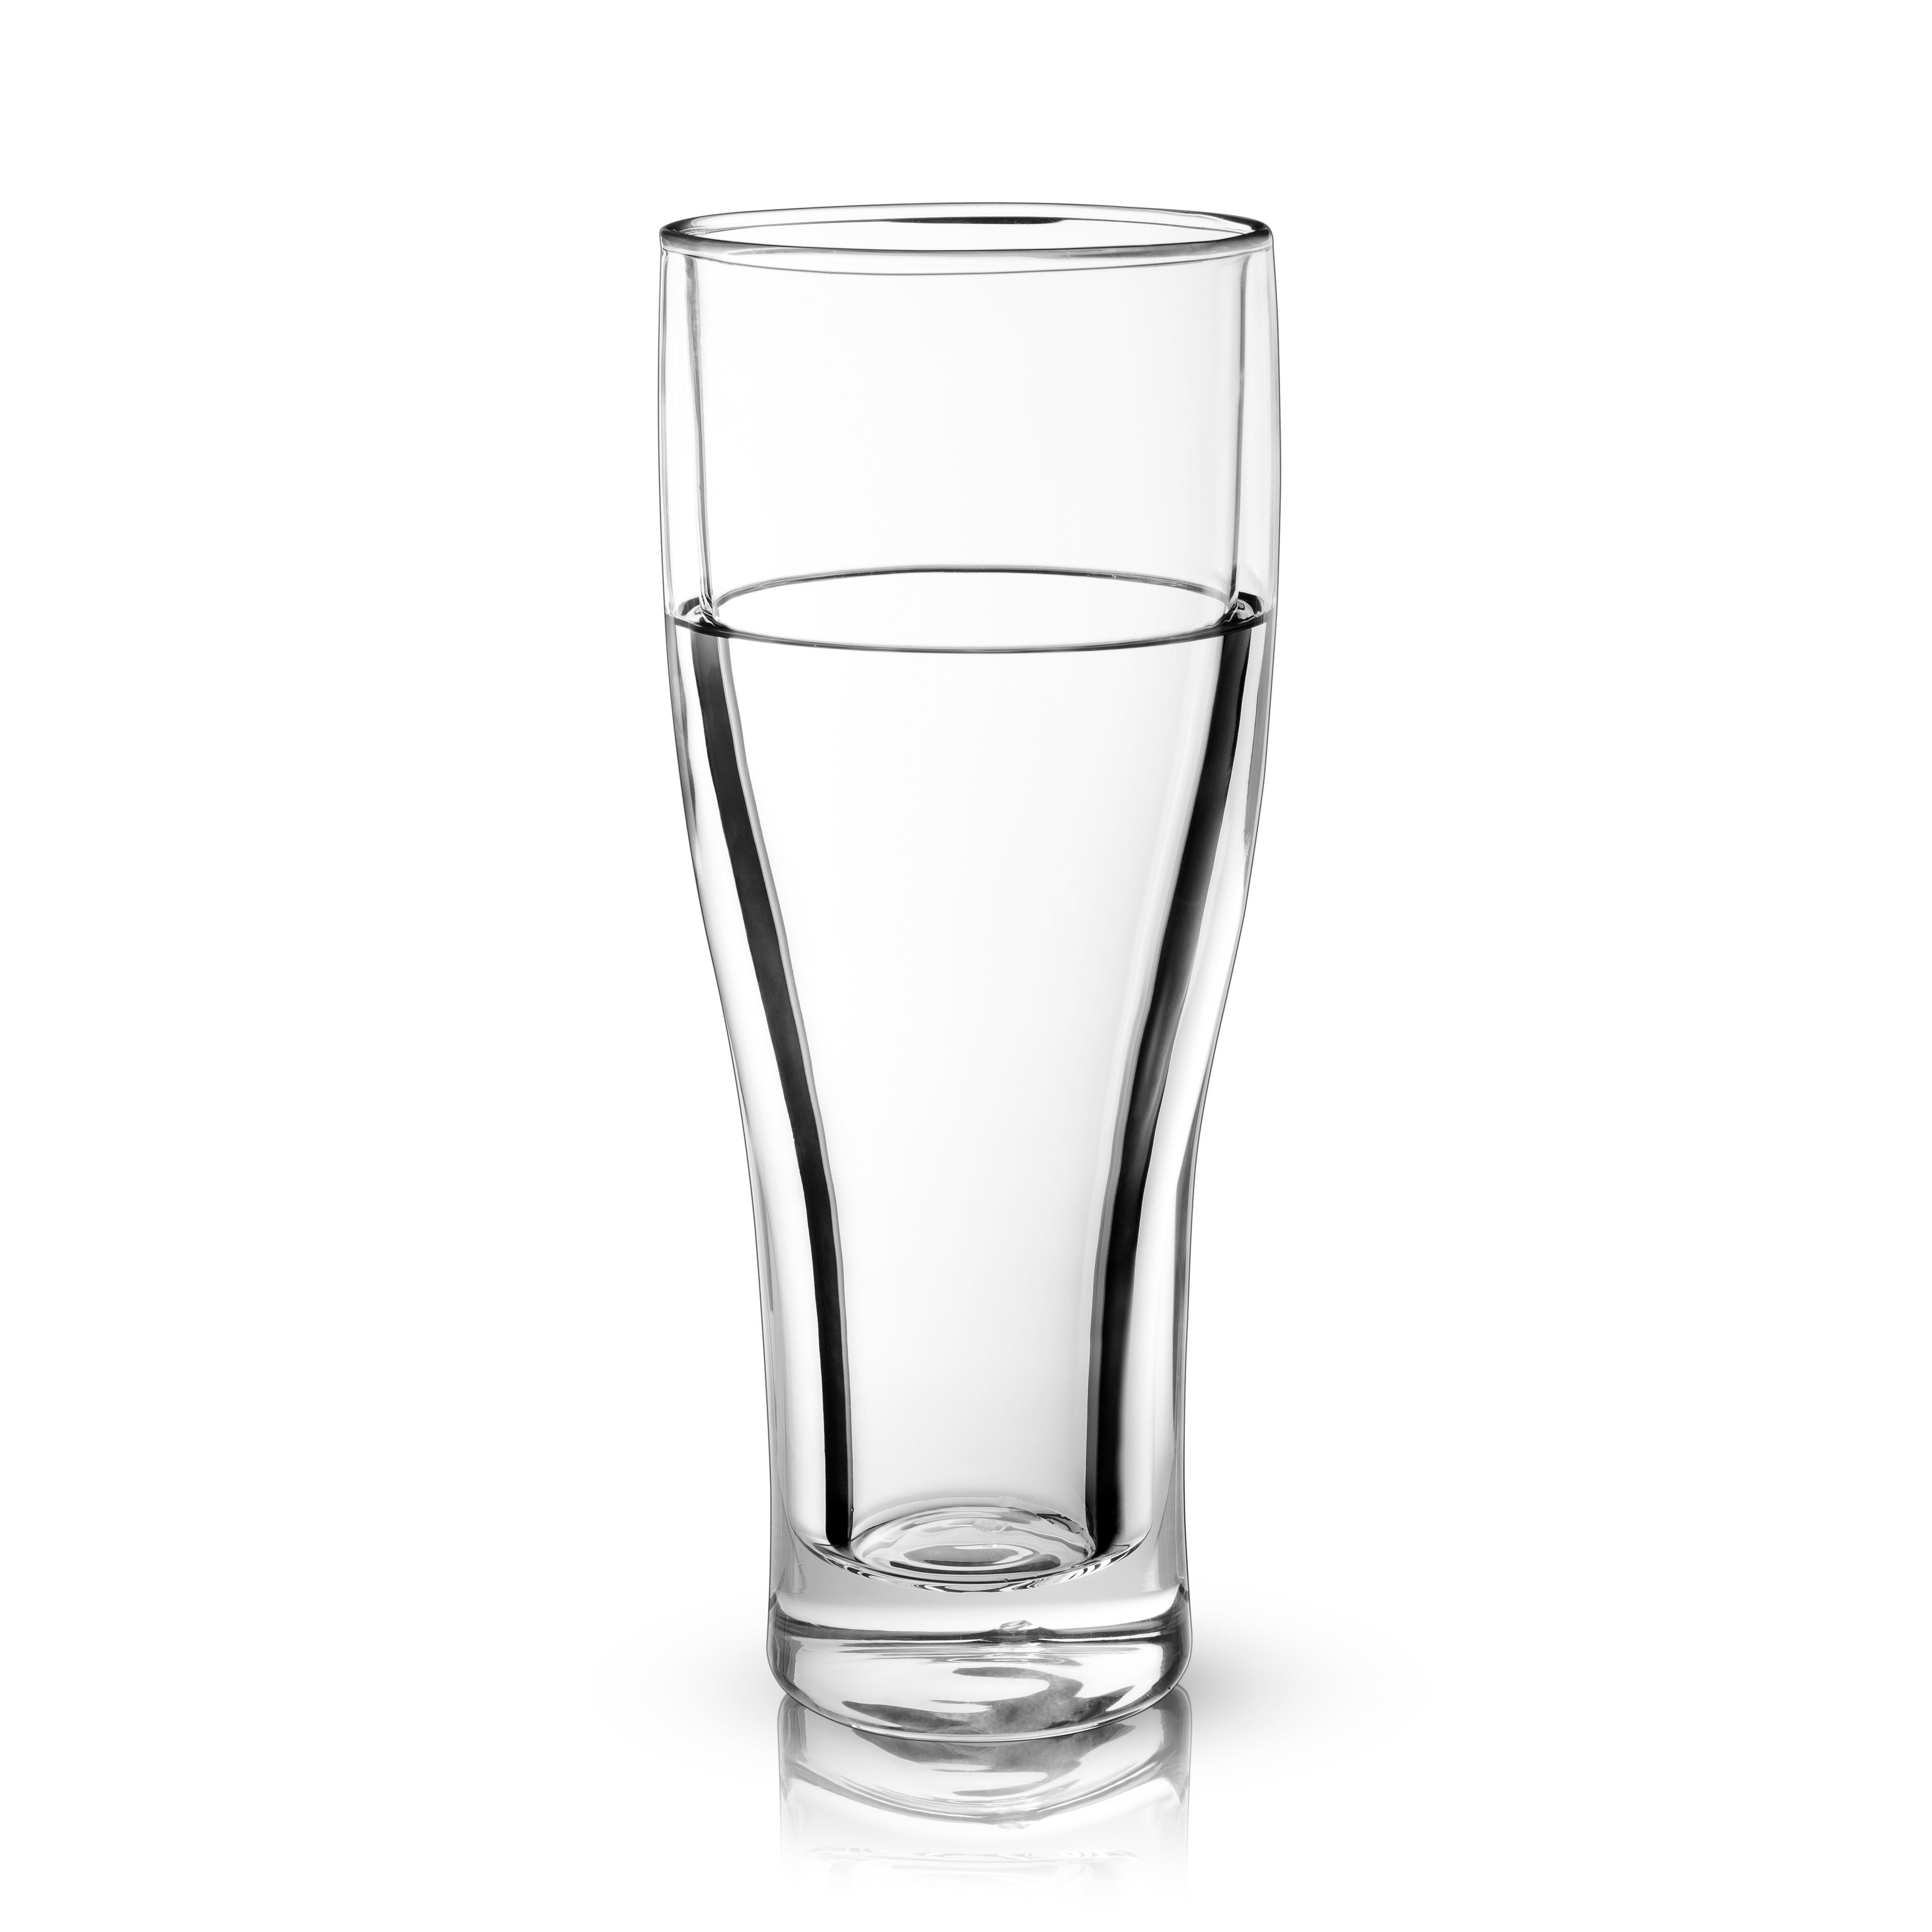 16 Oz. ARC Can Shaped Beer Glasses